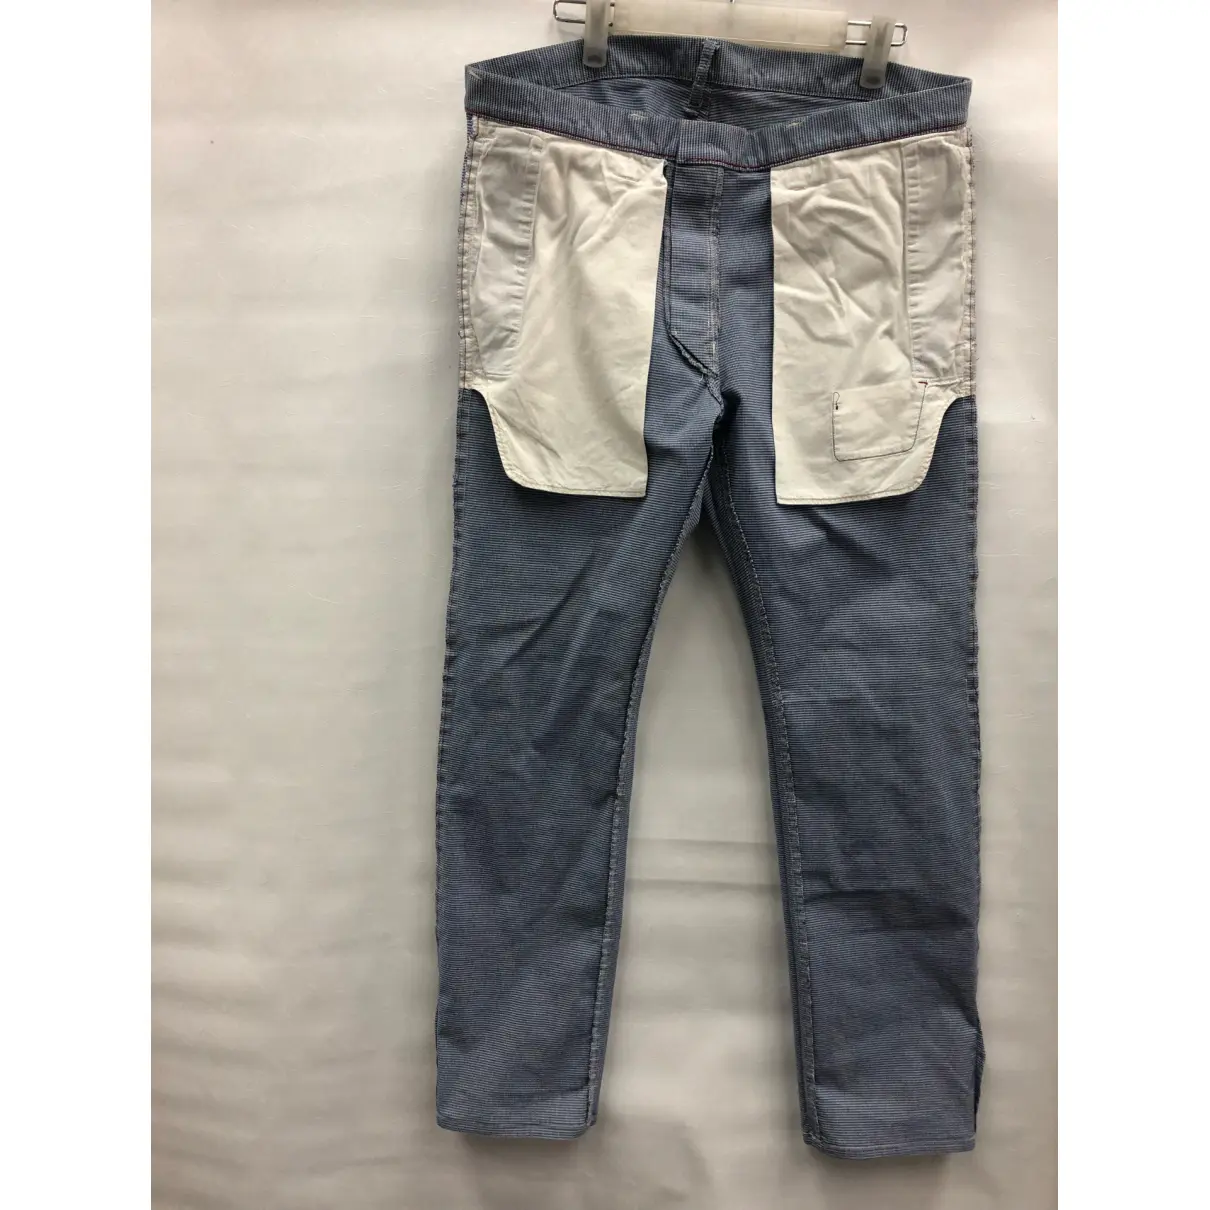 Buy 45RPM Trousers online